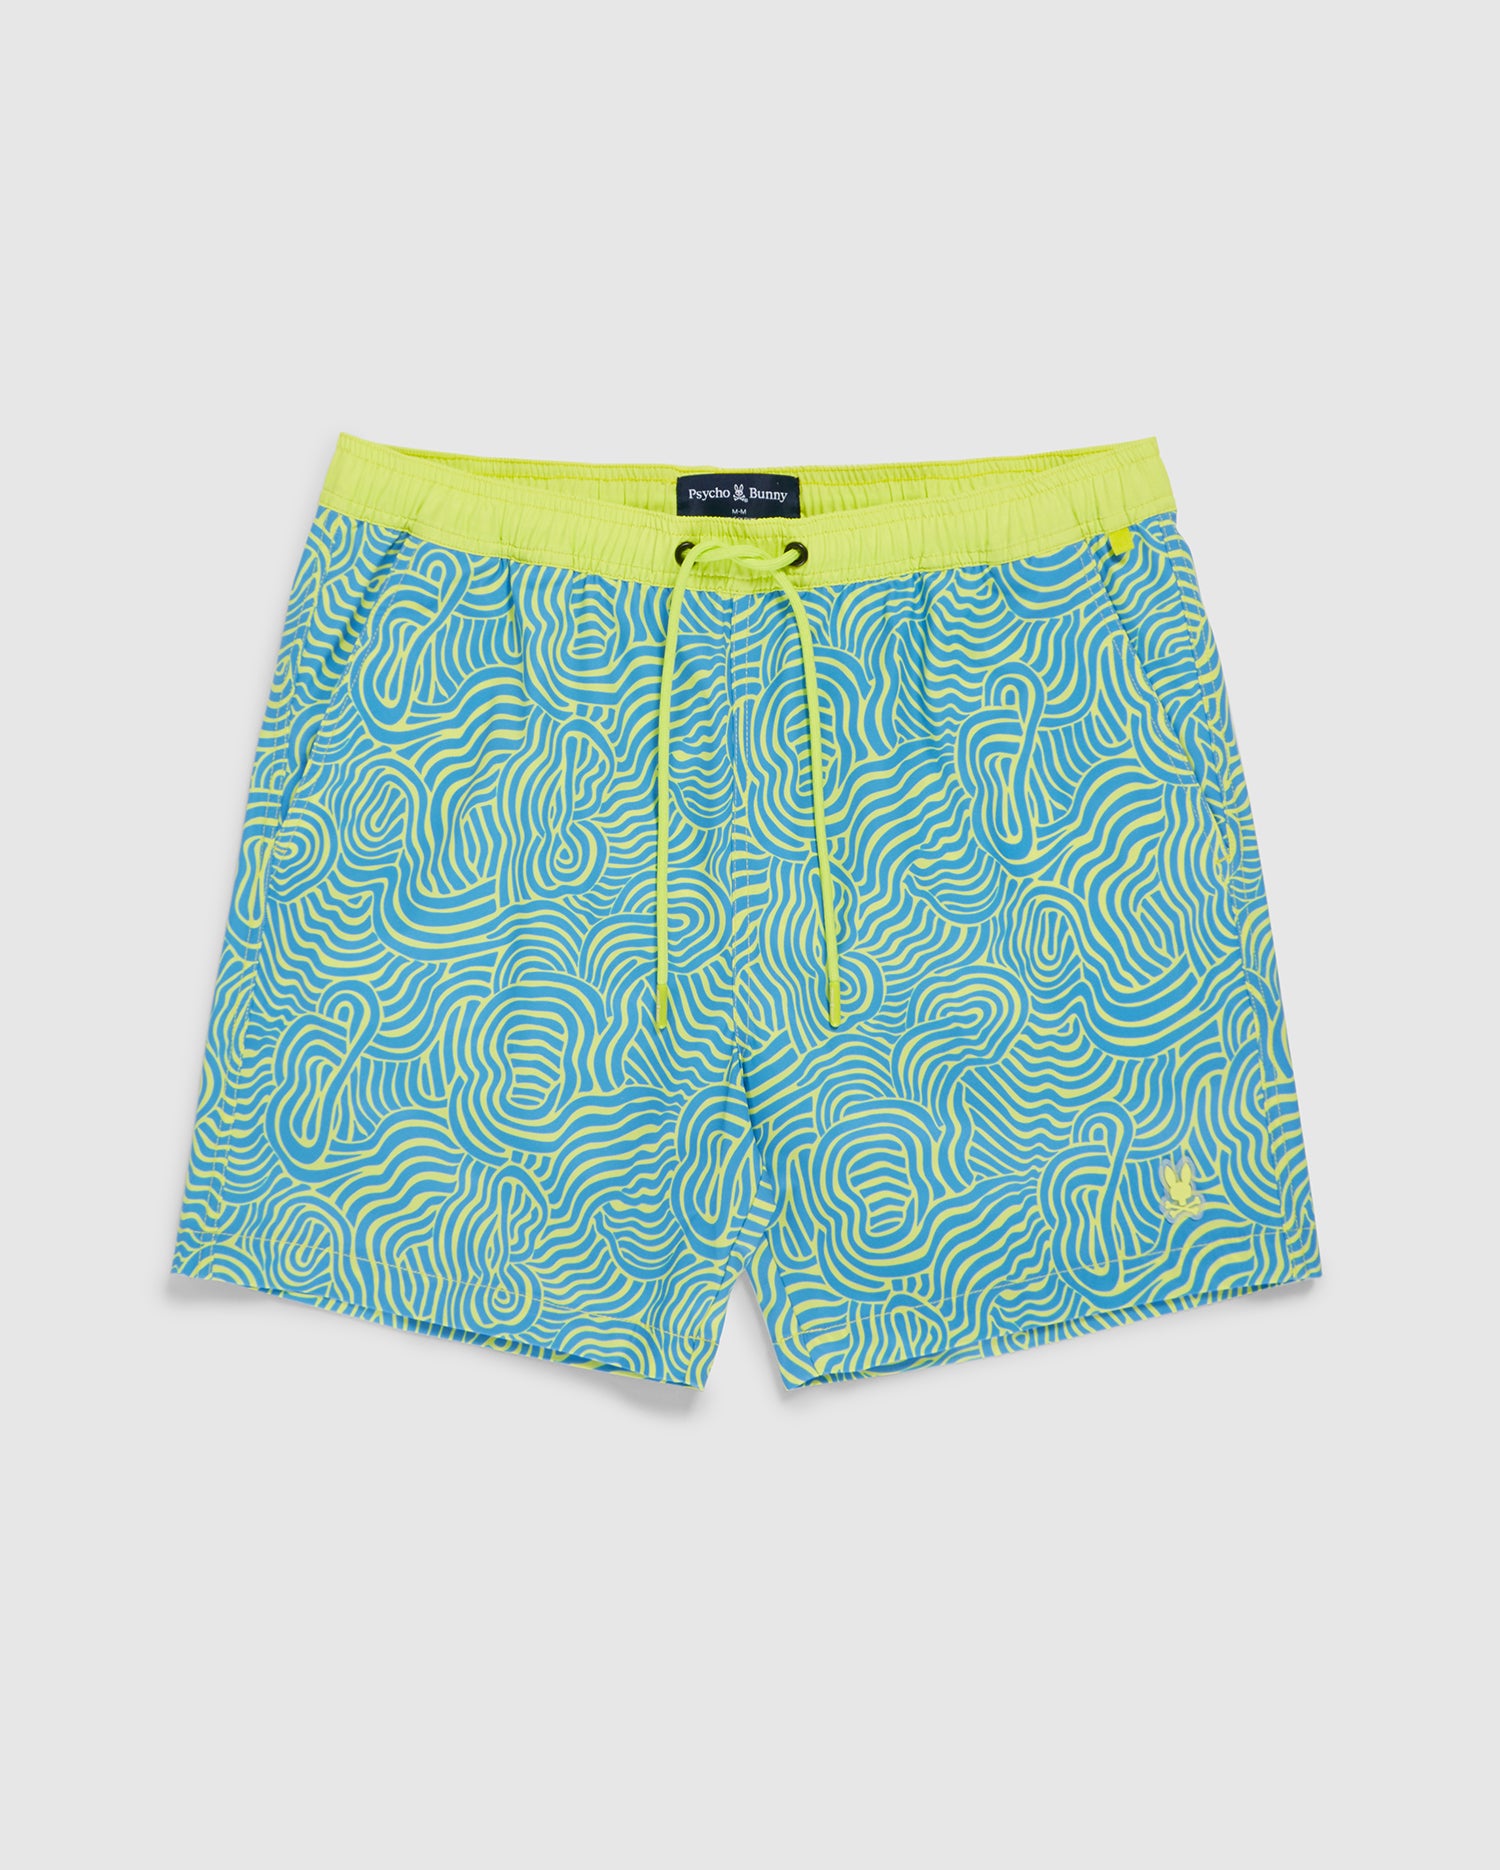 A pair of vibrant VERONA PRINT SWIM TRUNK - B6W172B2SW by Psycho Bunny featuring a neon green and blue wavy contour pattern. The waistband is a bright neon yellow, complemented by a yellow drawstring at the front. Made from quick-dry fabric, these shorts include a small emblem on the lower right leg.